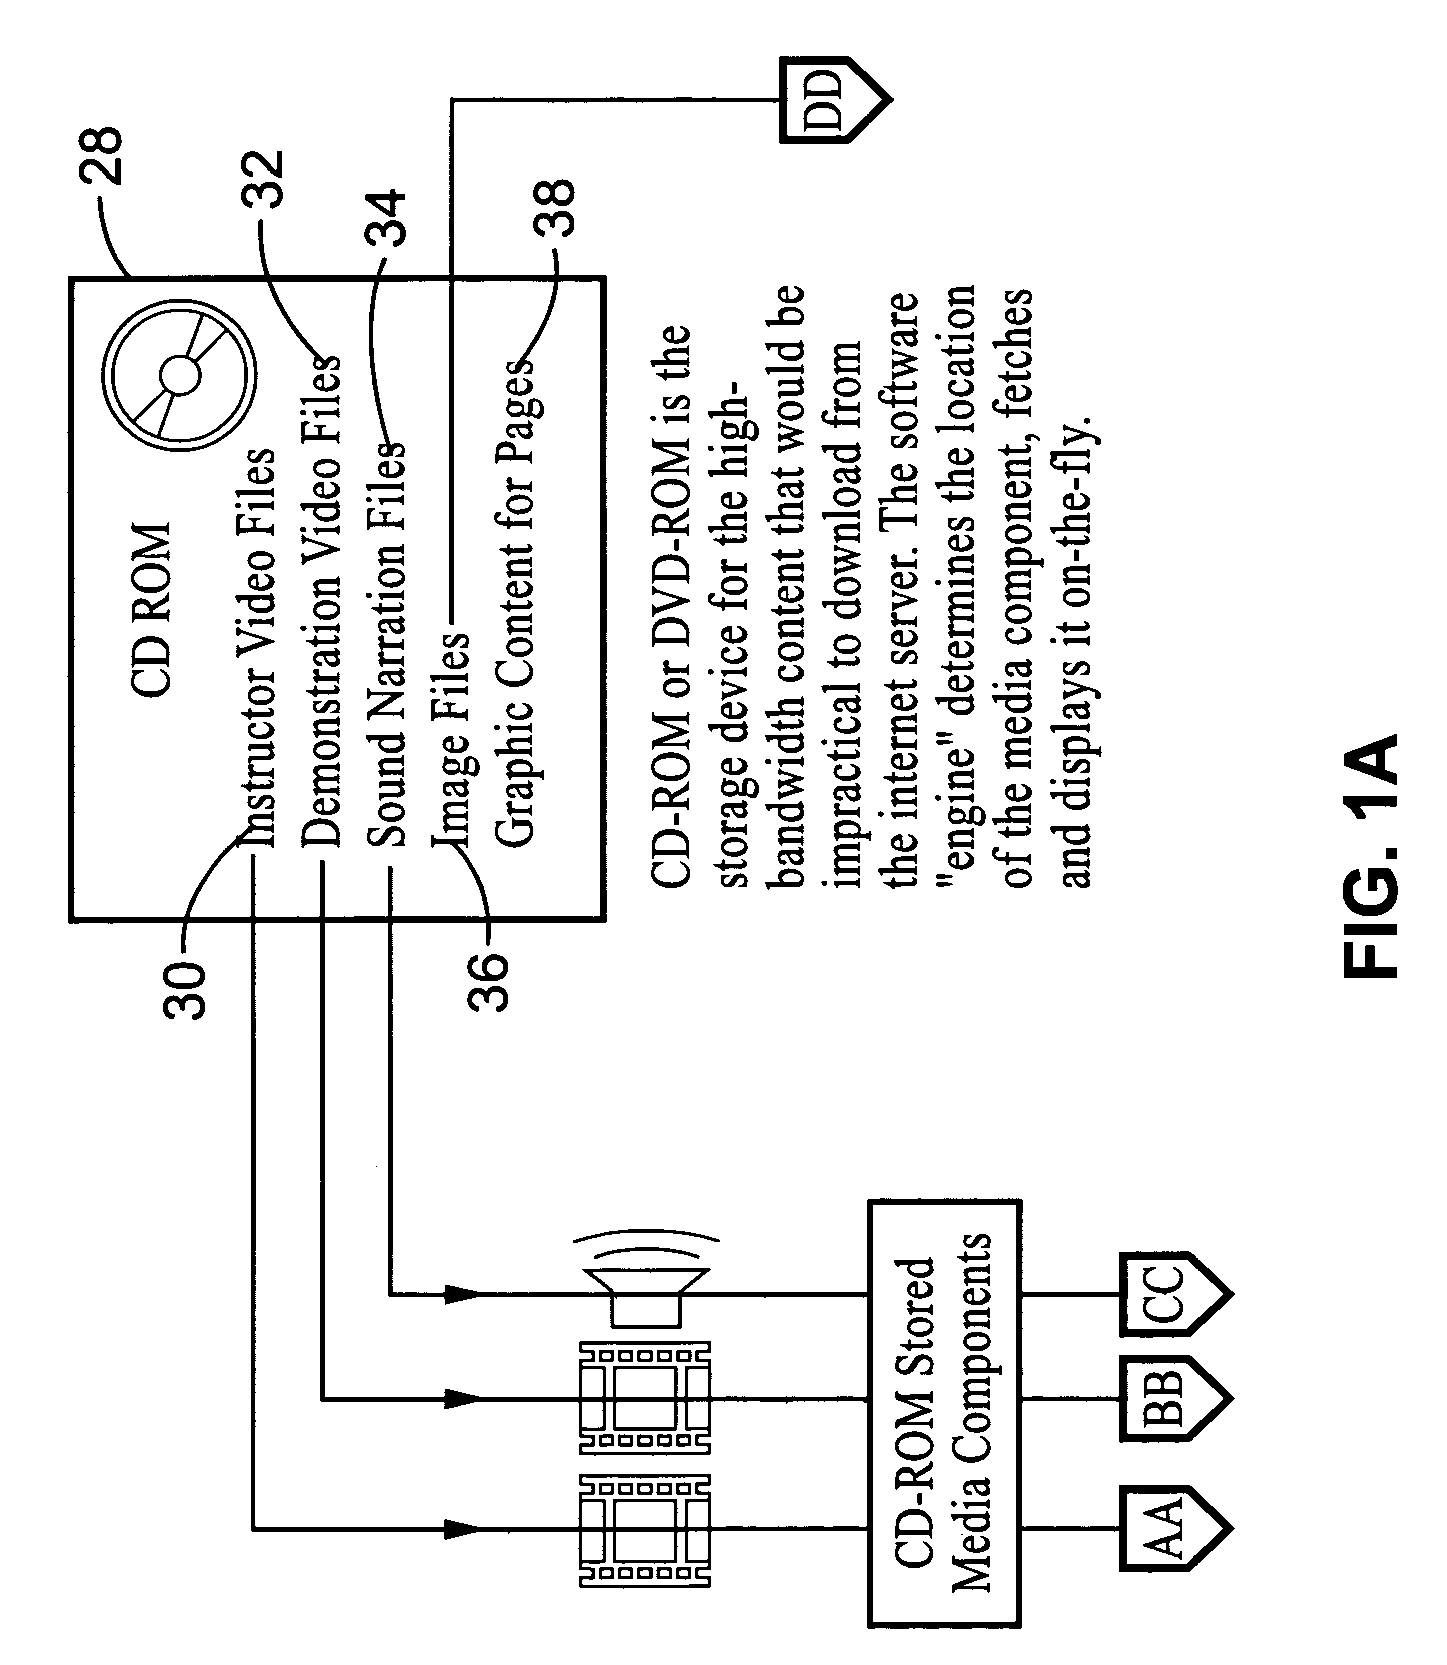 Method and apparatus for accessing and displaying multimedia content